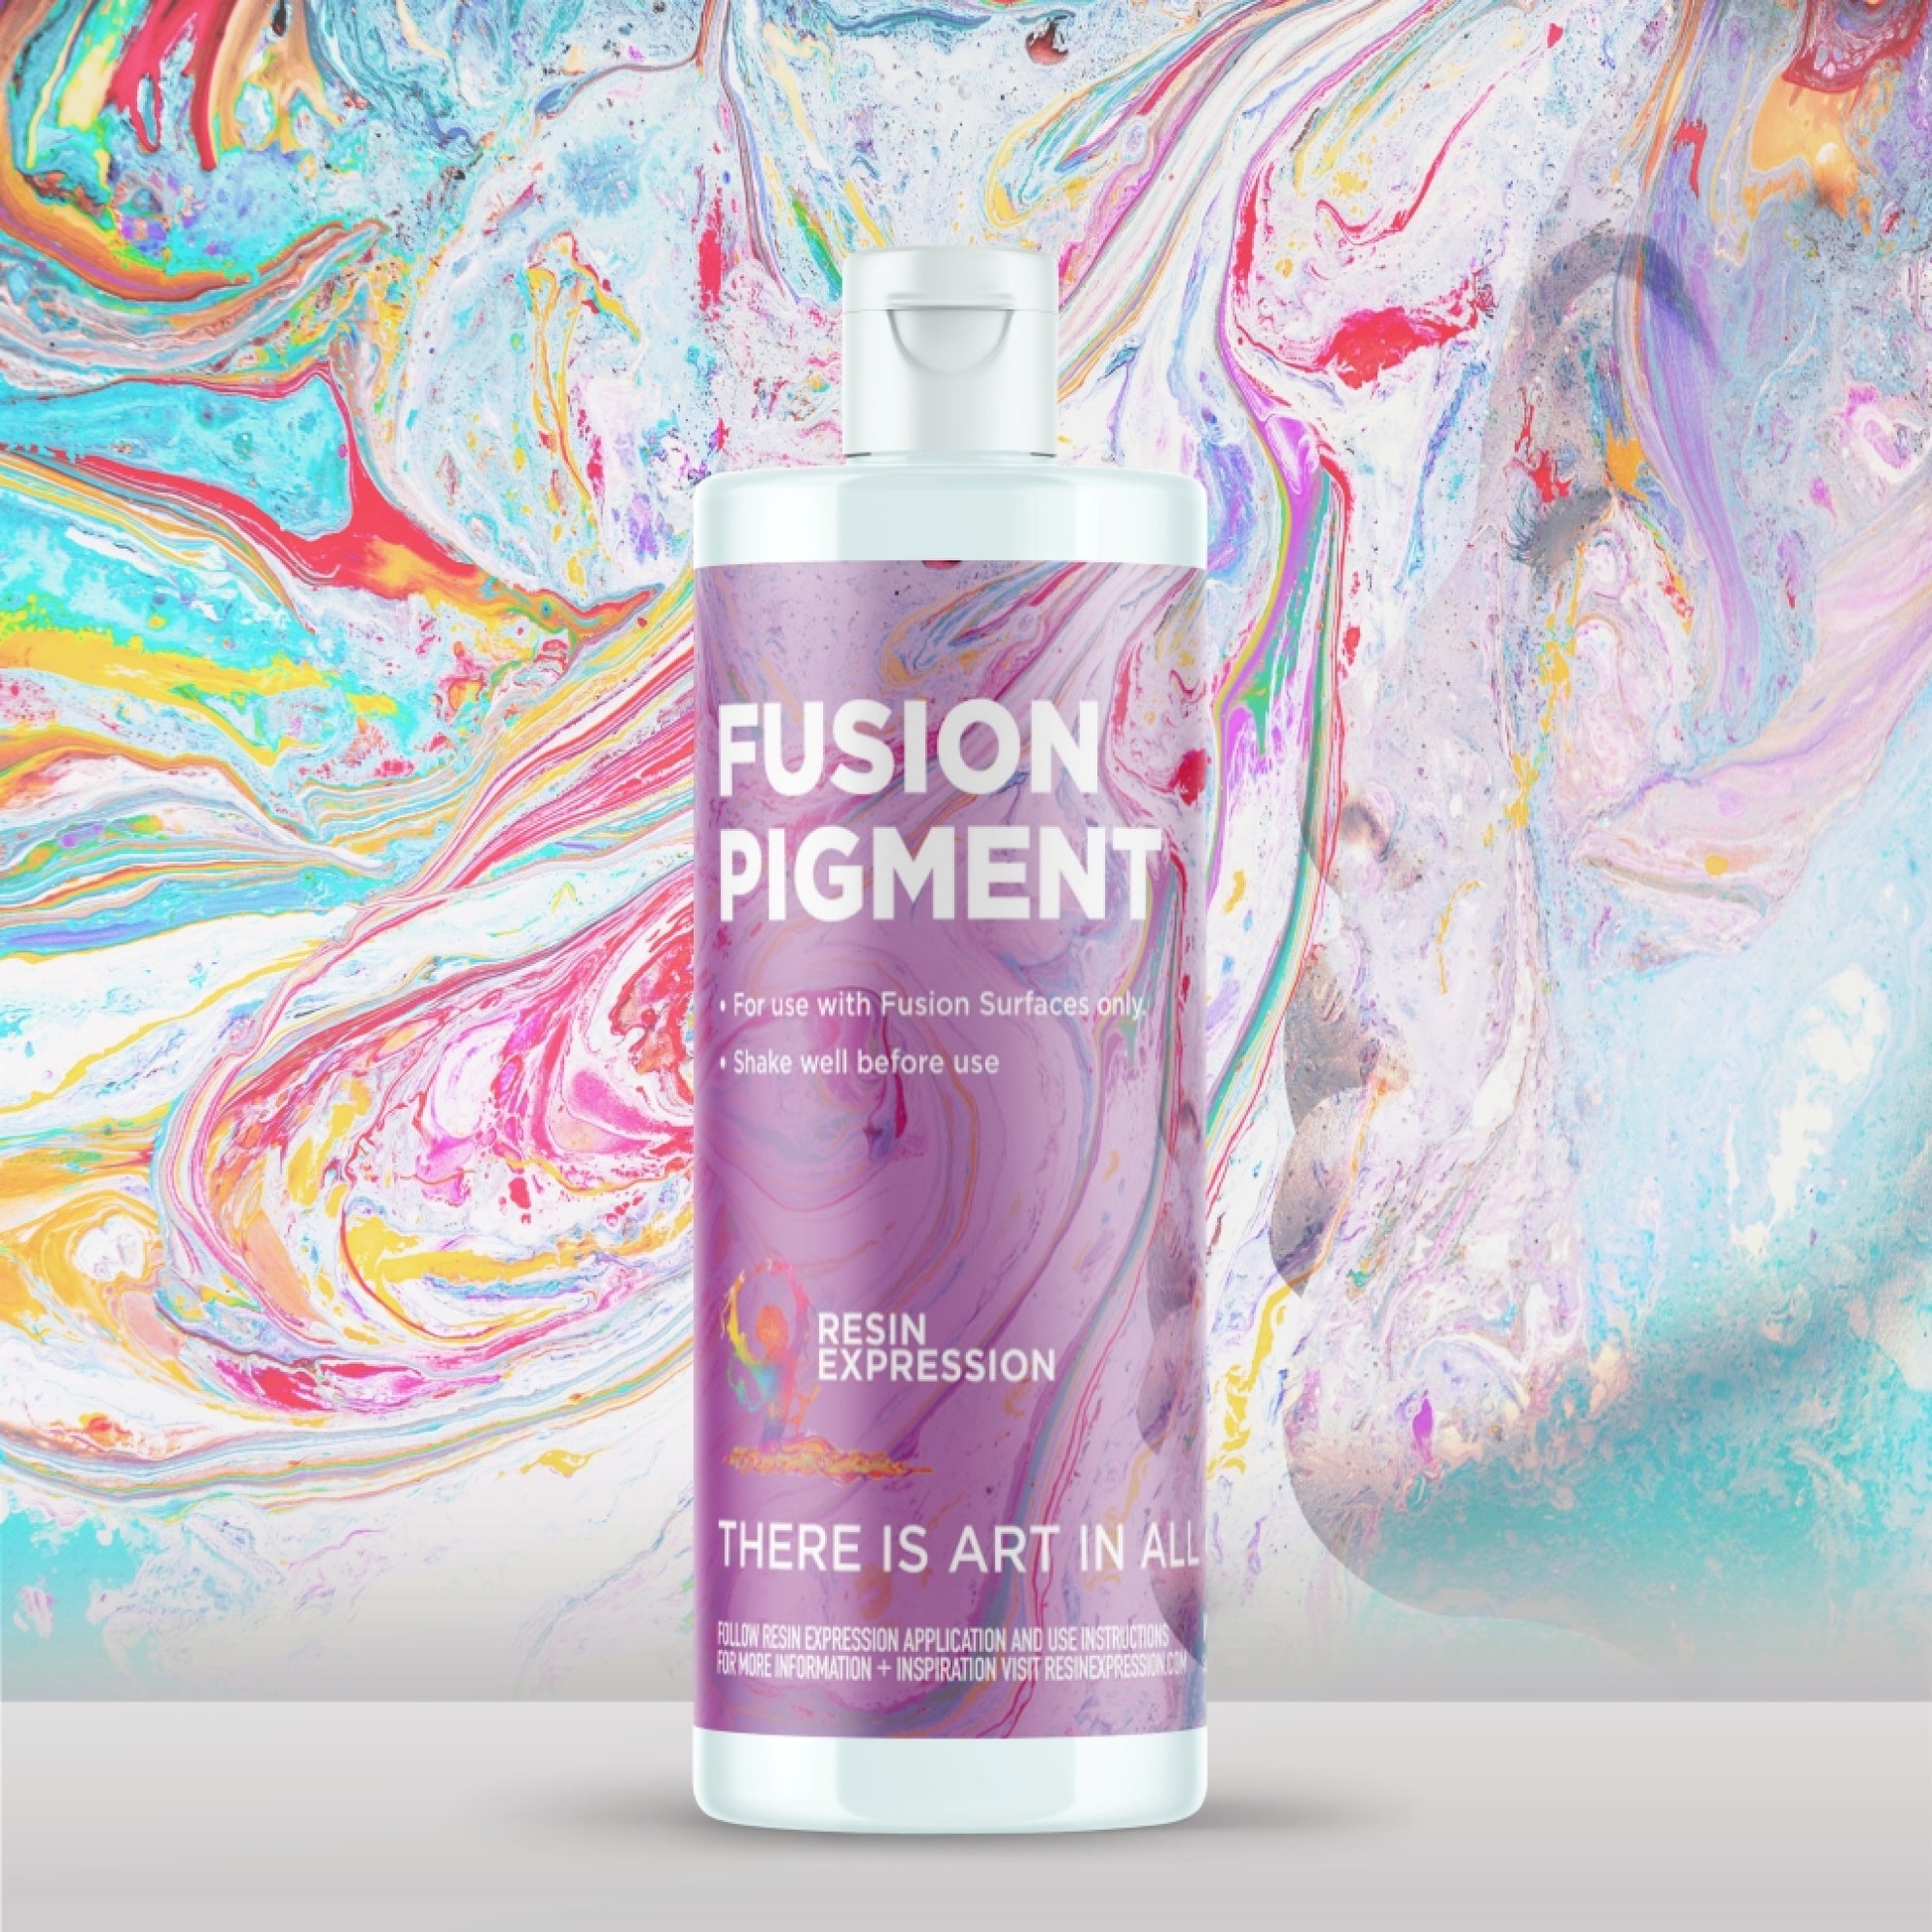 Unleash creativity on your surfaces with the Carnival Fusion Kit.